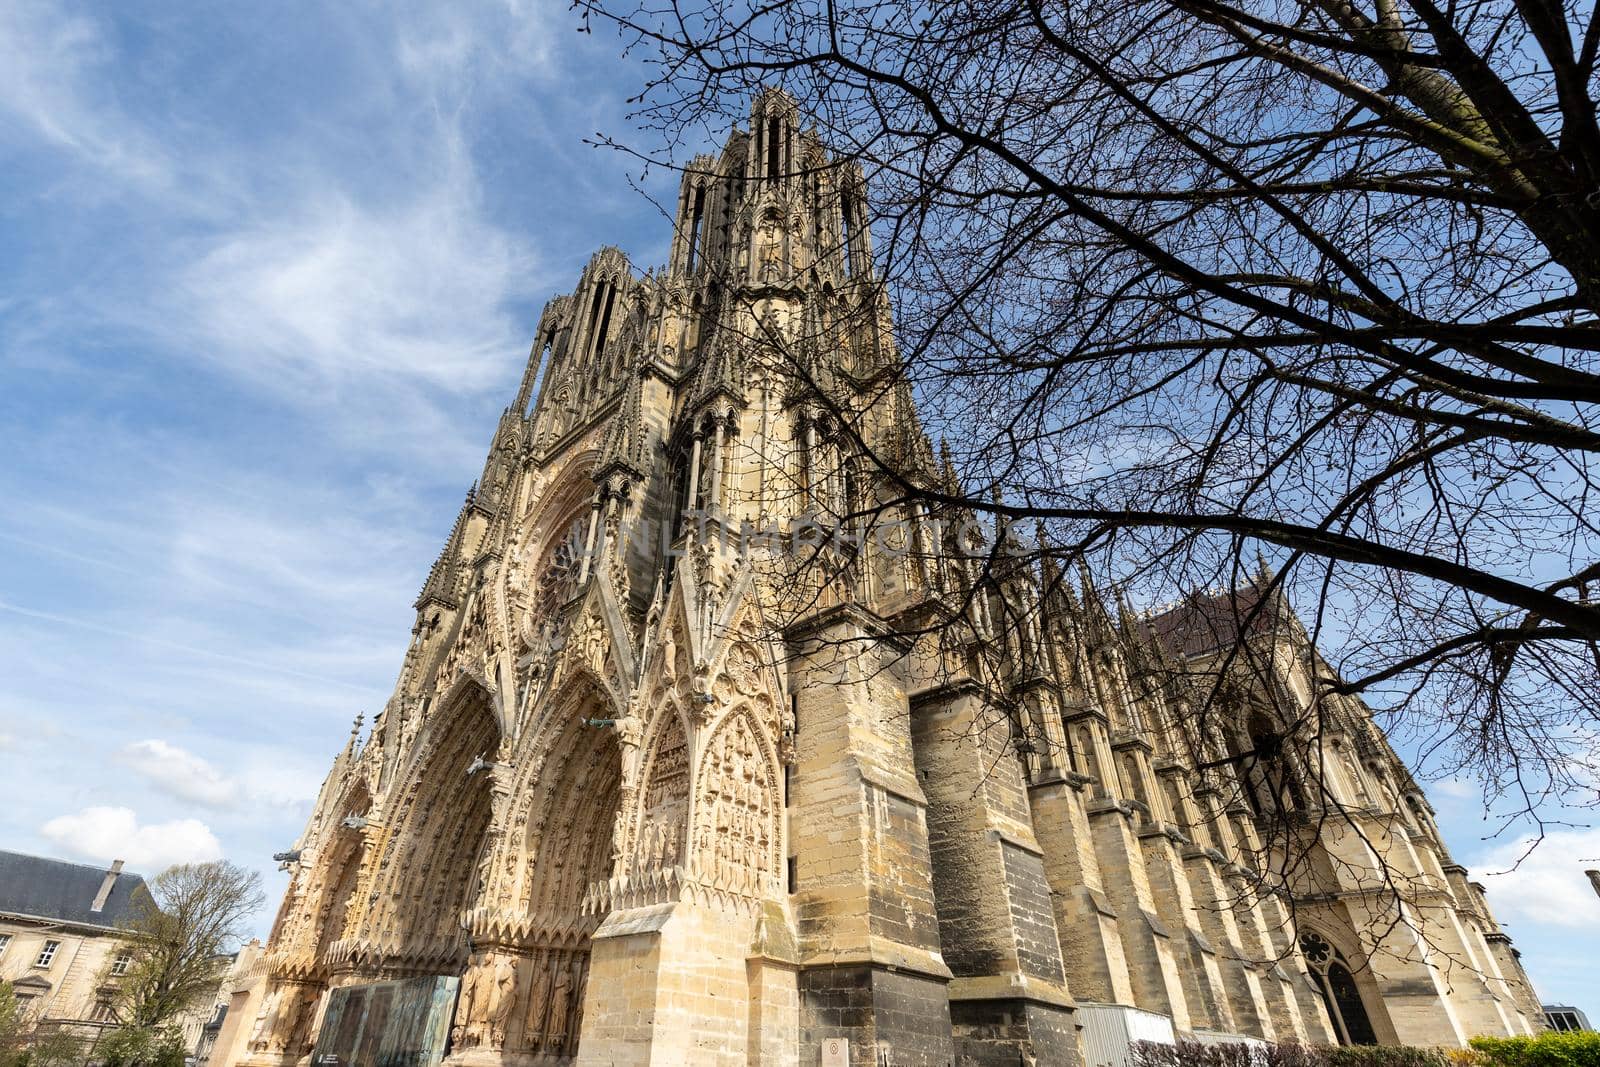 Wide angle view at cathedral Notre Dame in Reims, France with tree in foreground